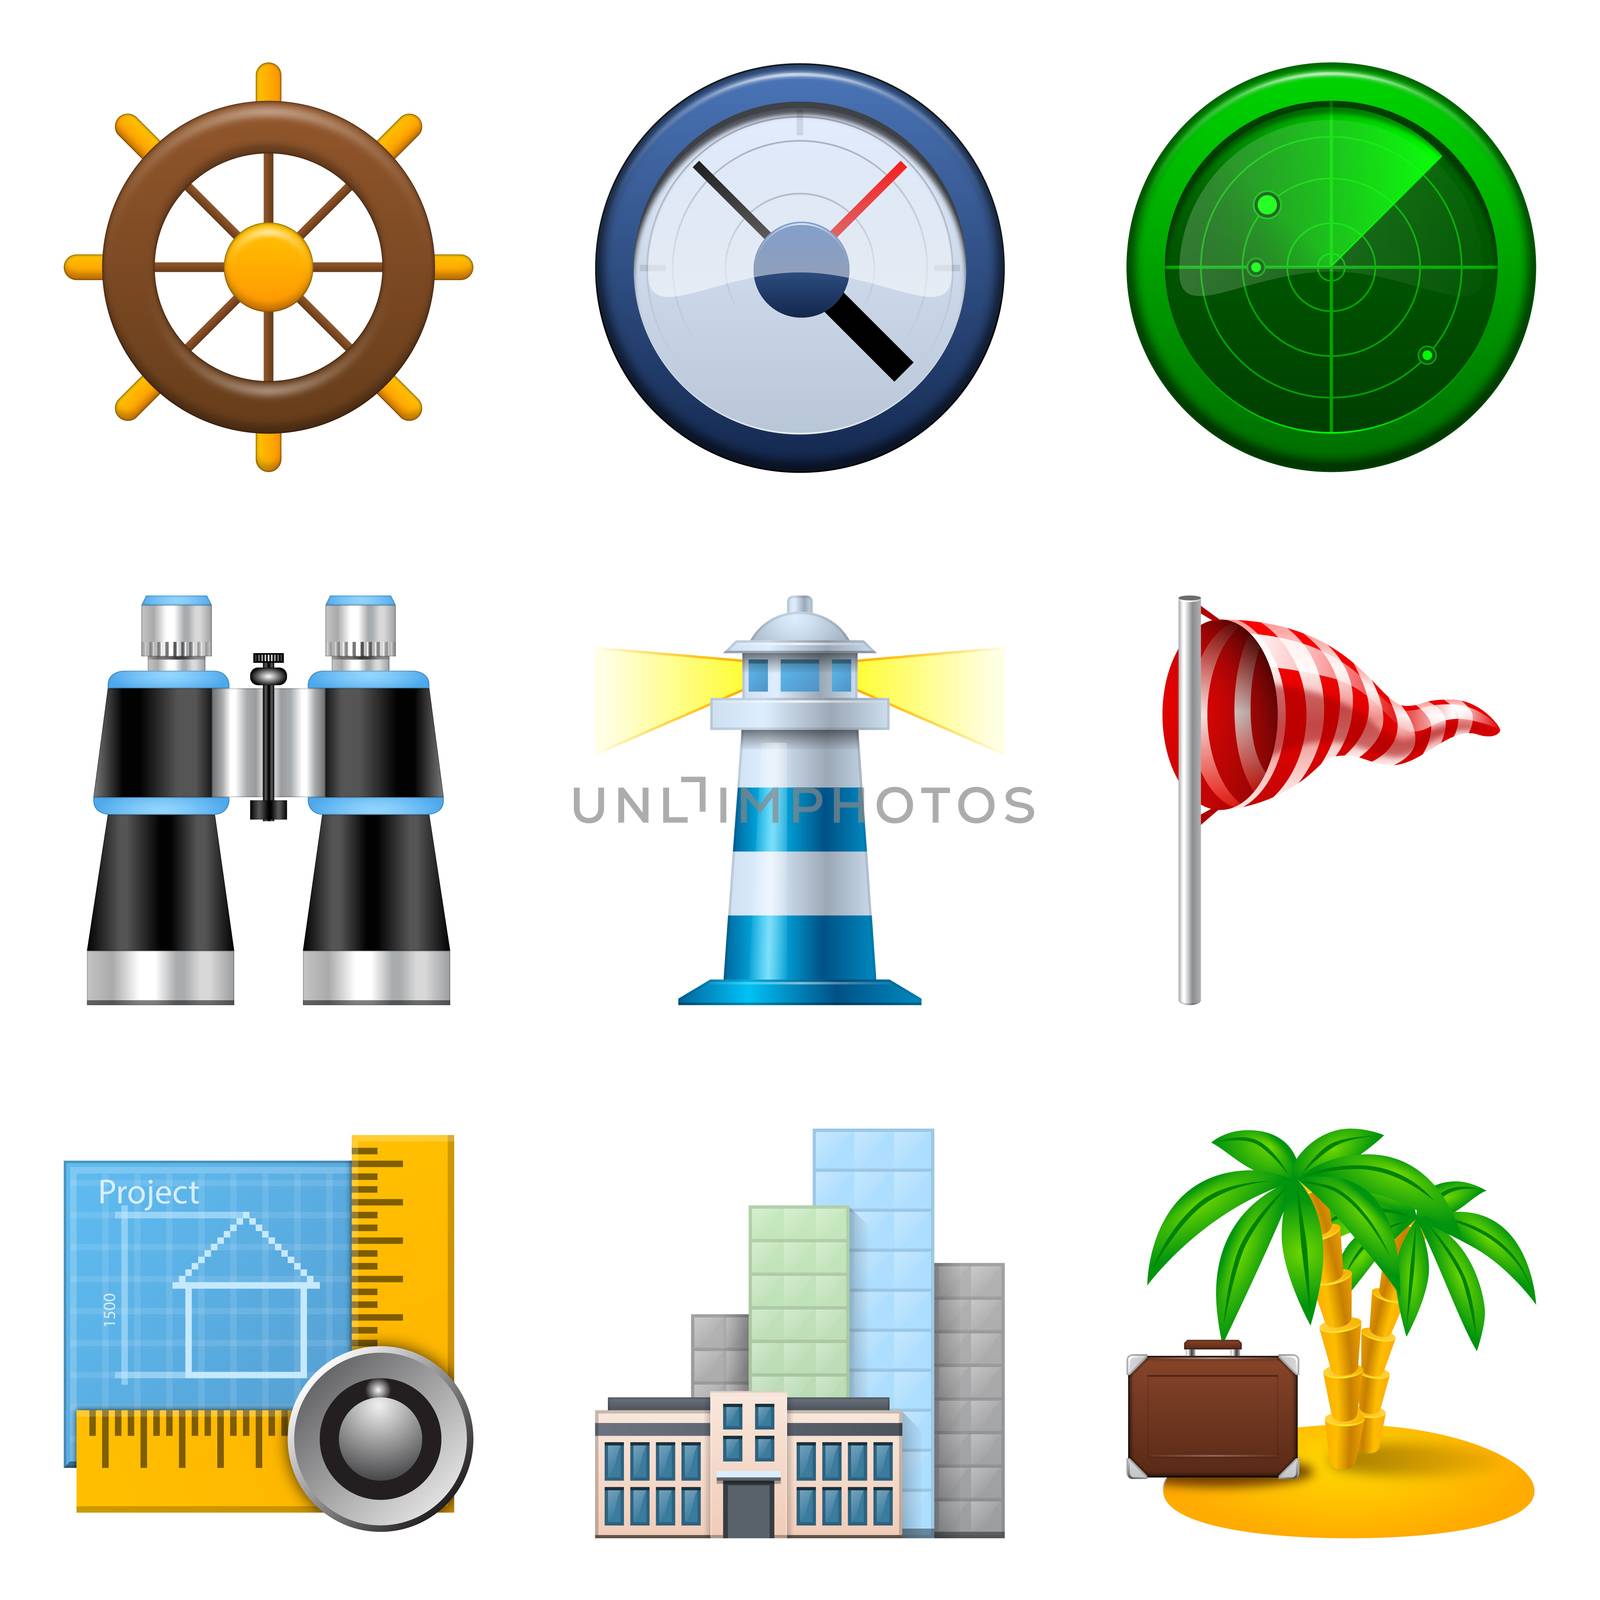 Travel and navigation icons isolated on a white background. The icon set has realistic style.